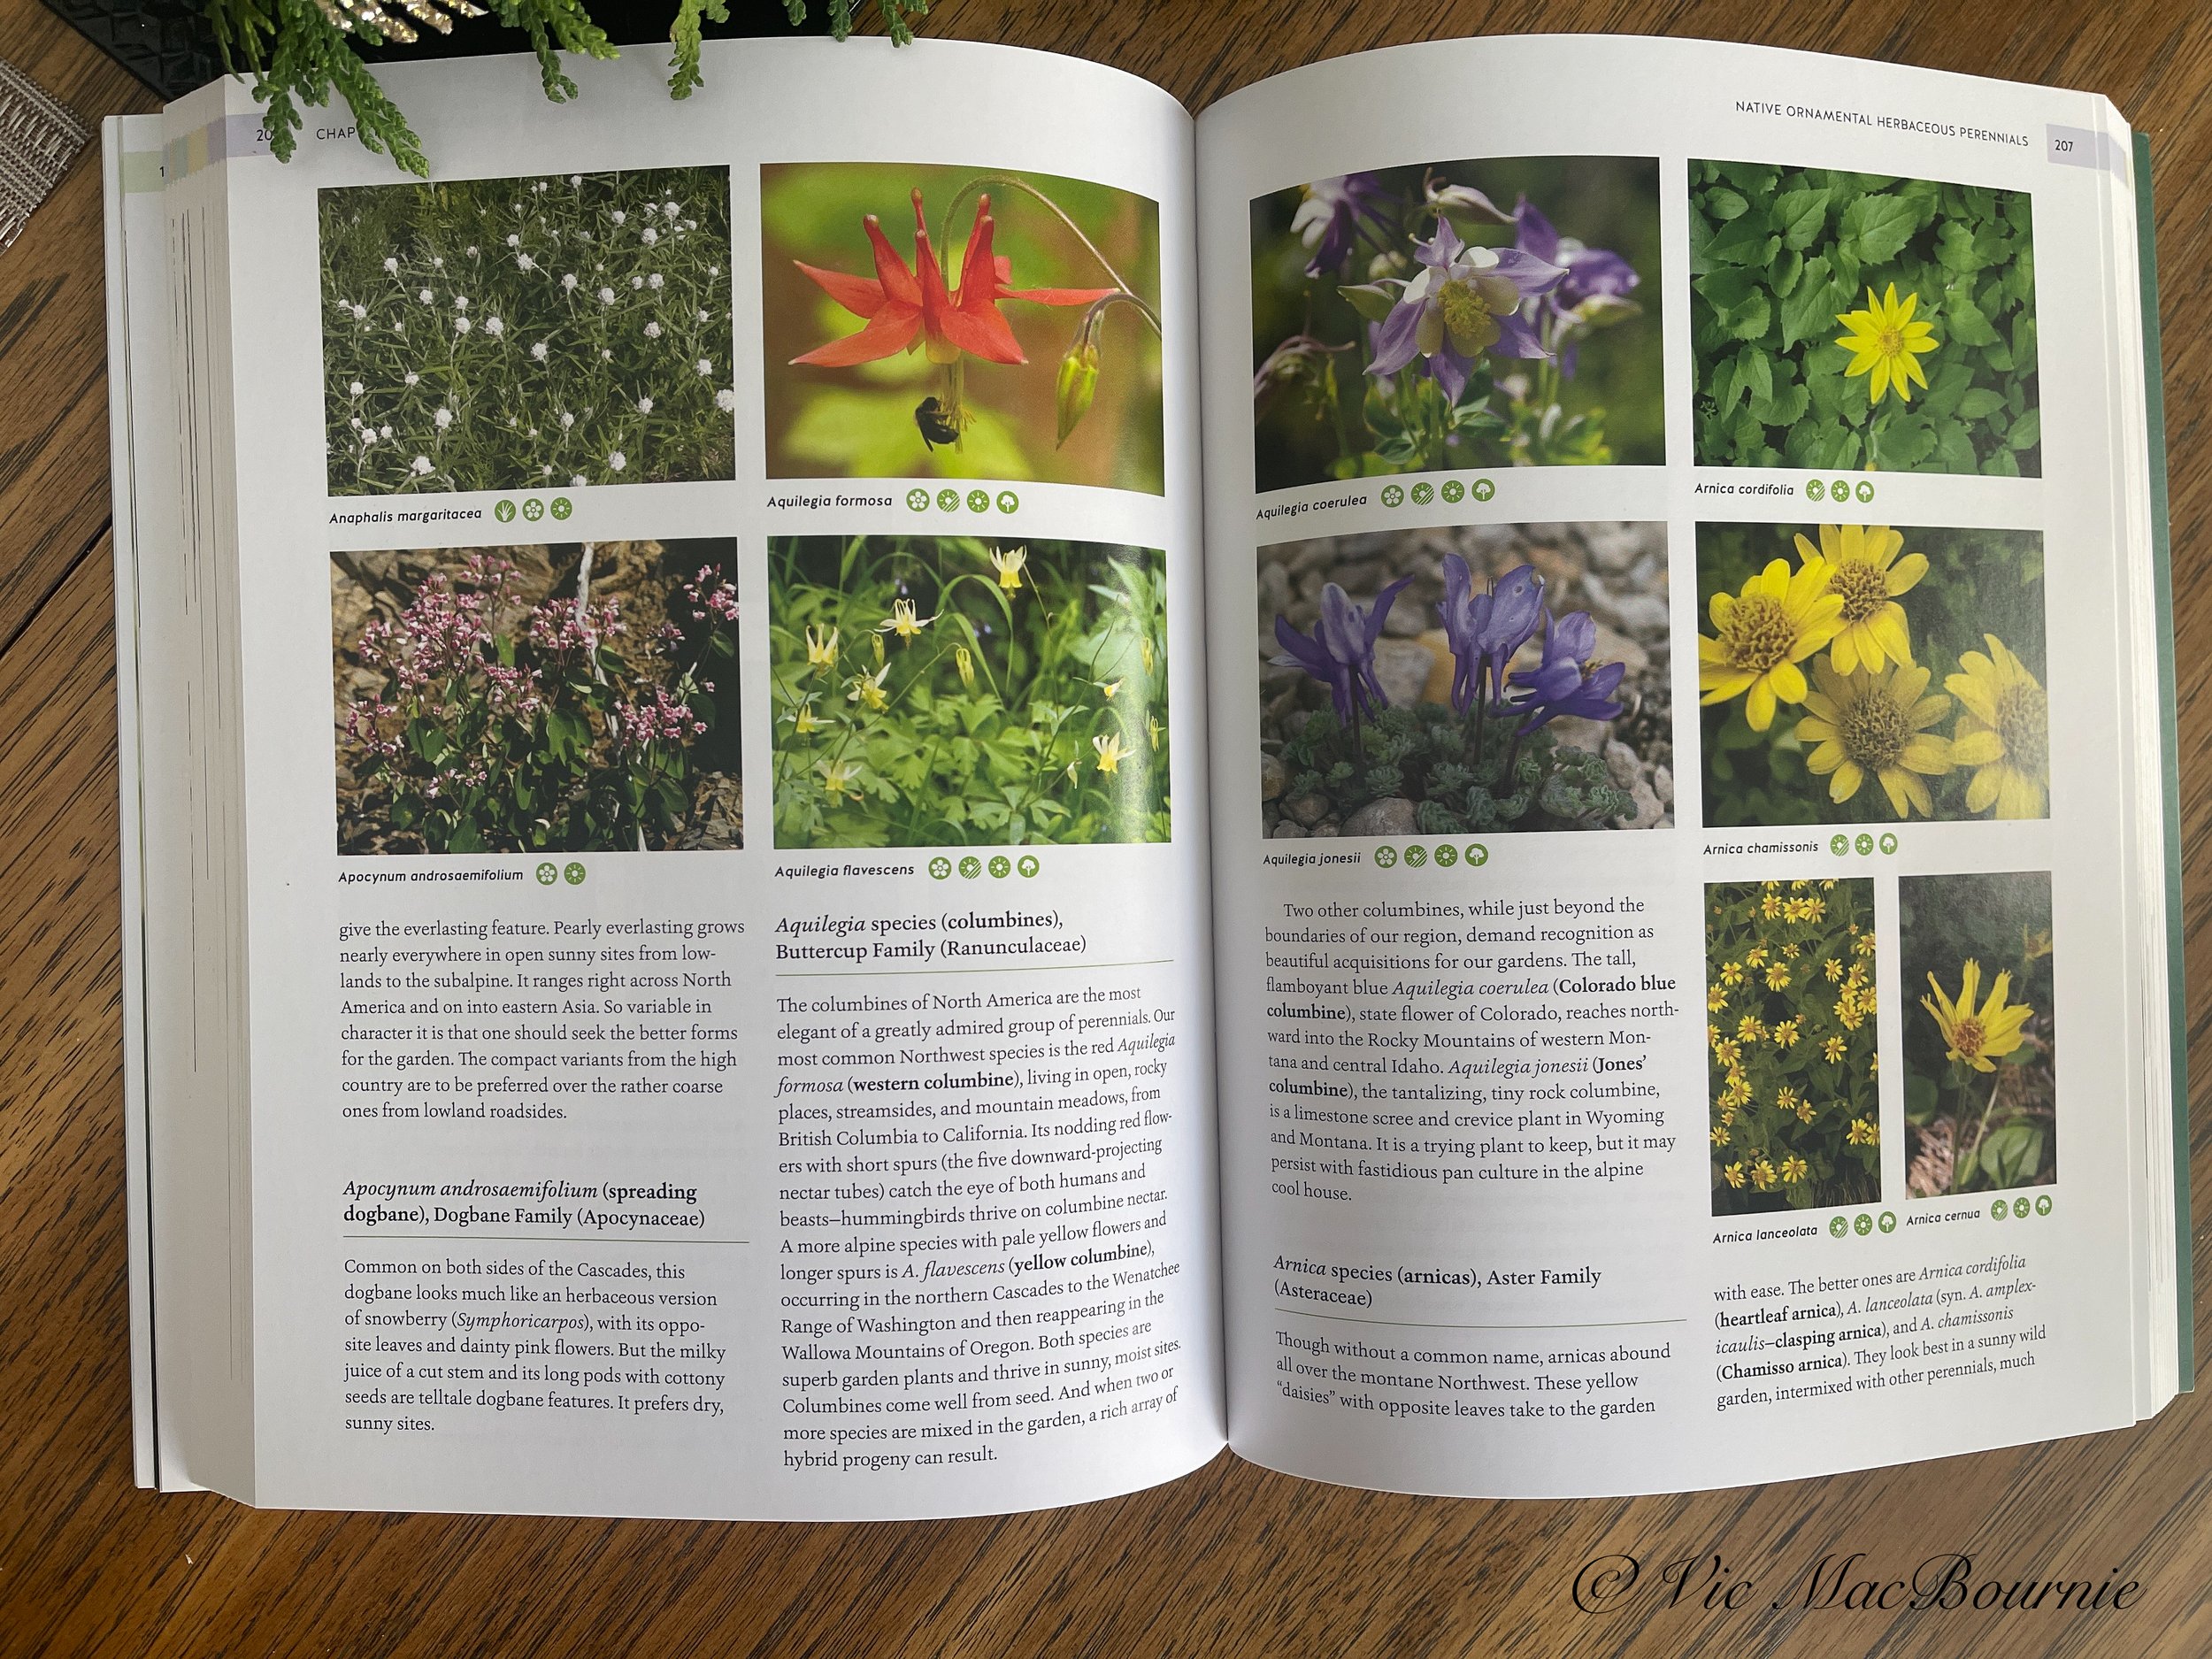 An example of the attention to detail in the book including the small green icons under the pictures that establishes the best locations to plant these individual plants.